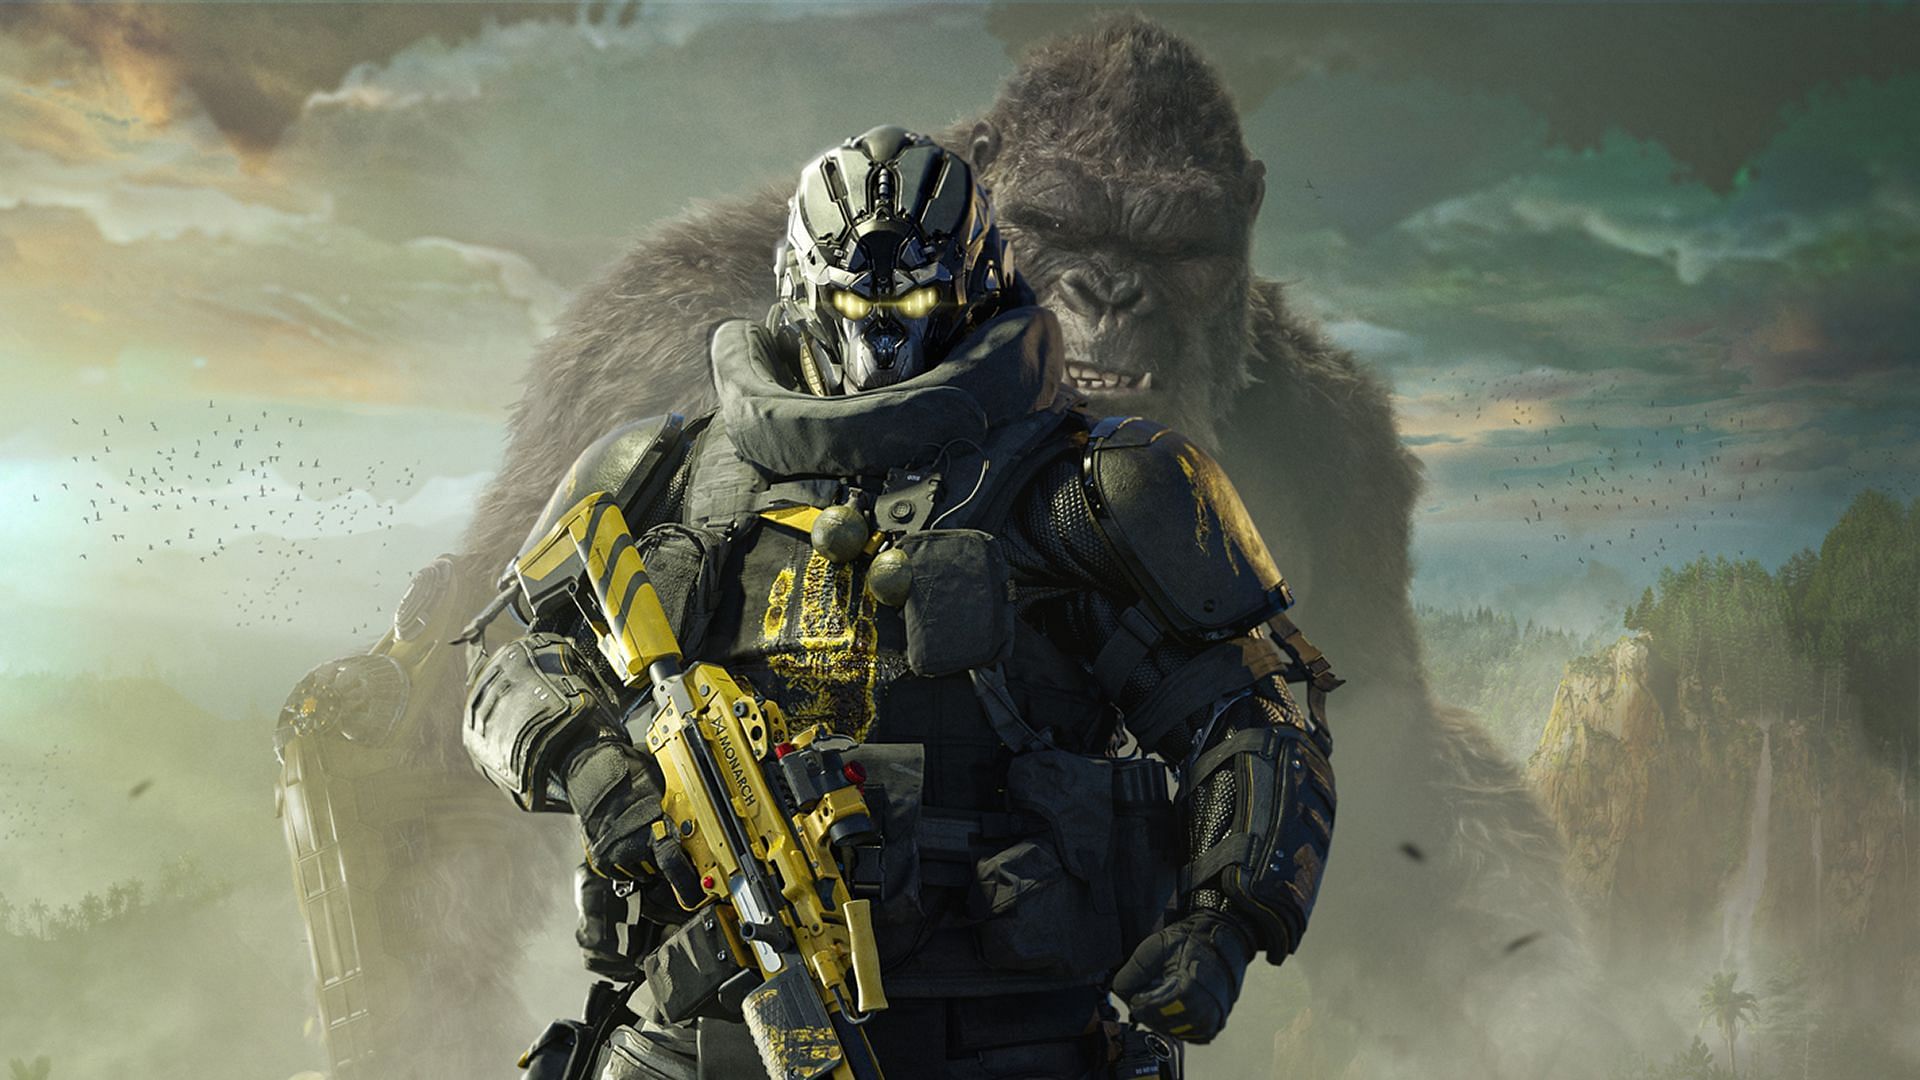 Operator Kong in the Godzilla x Kong crossover event in Warzone and MW3